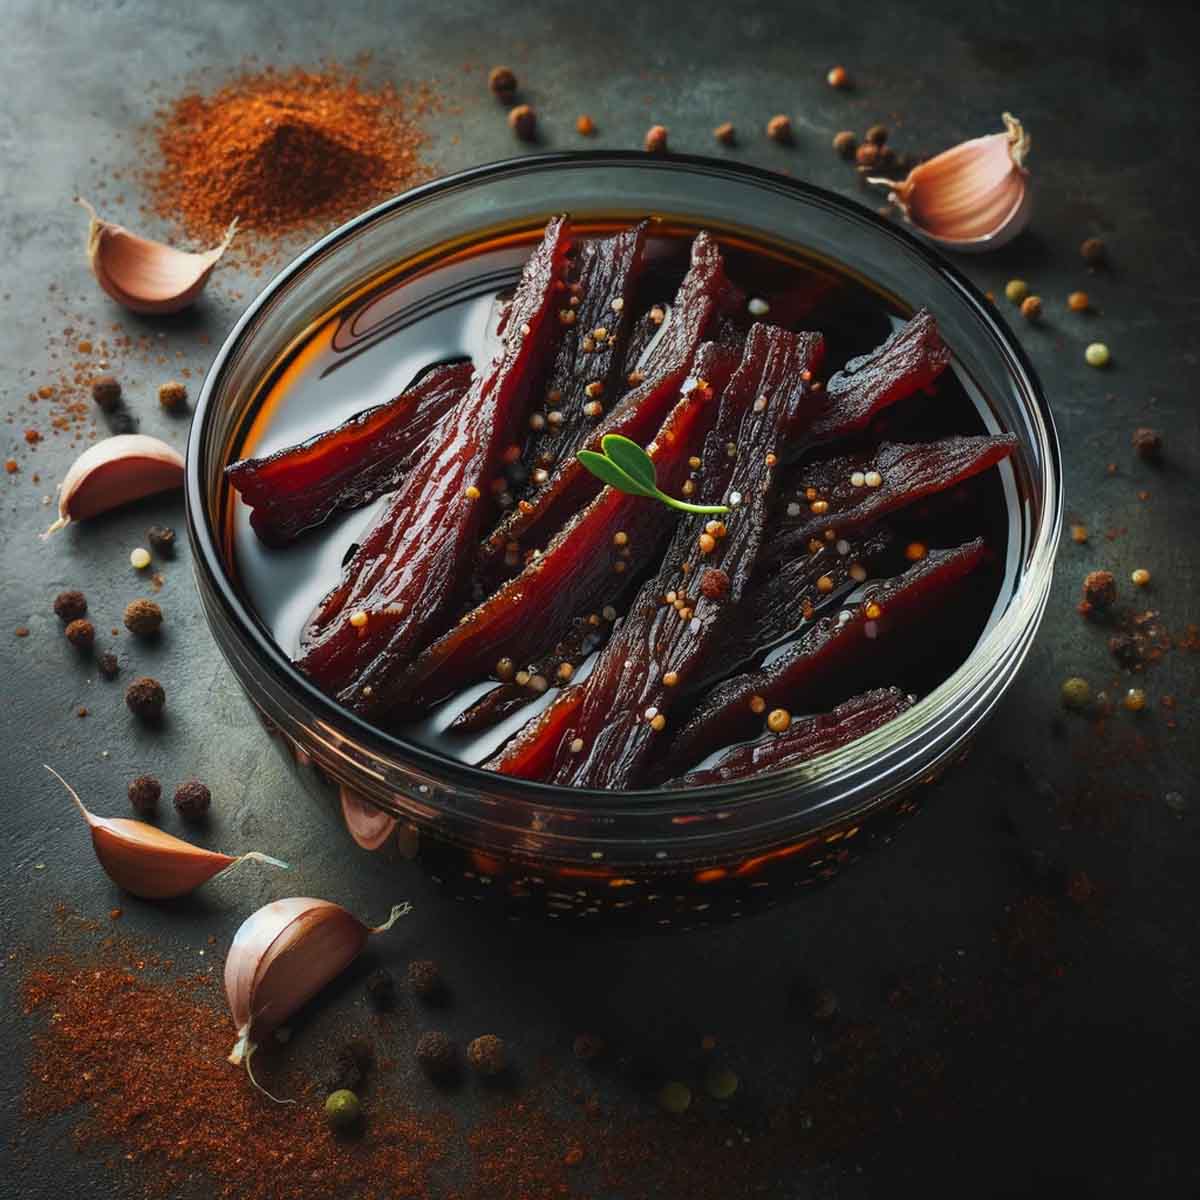 Beef jerky strips fully submerged in a dark, glossy marinade inside a glass bowl, with visible specks of garlic and onion powder.